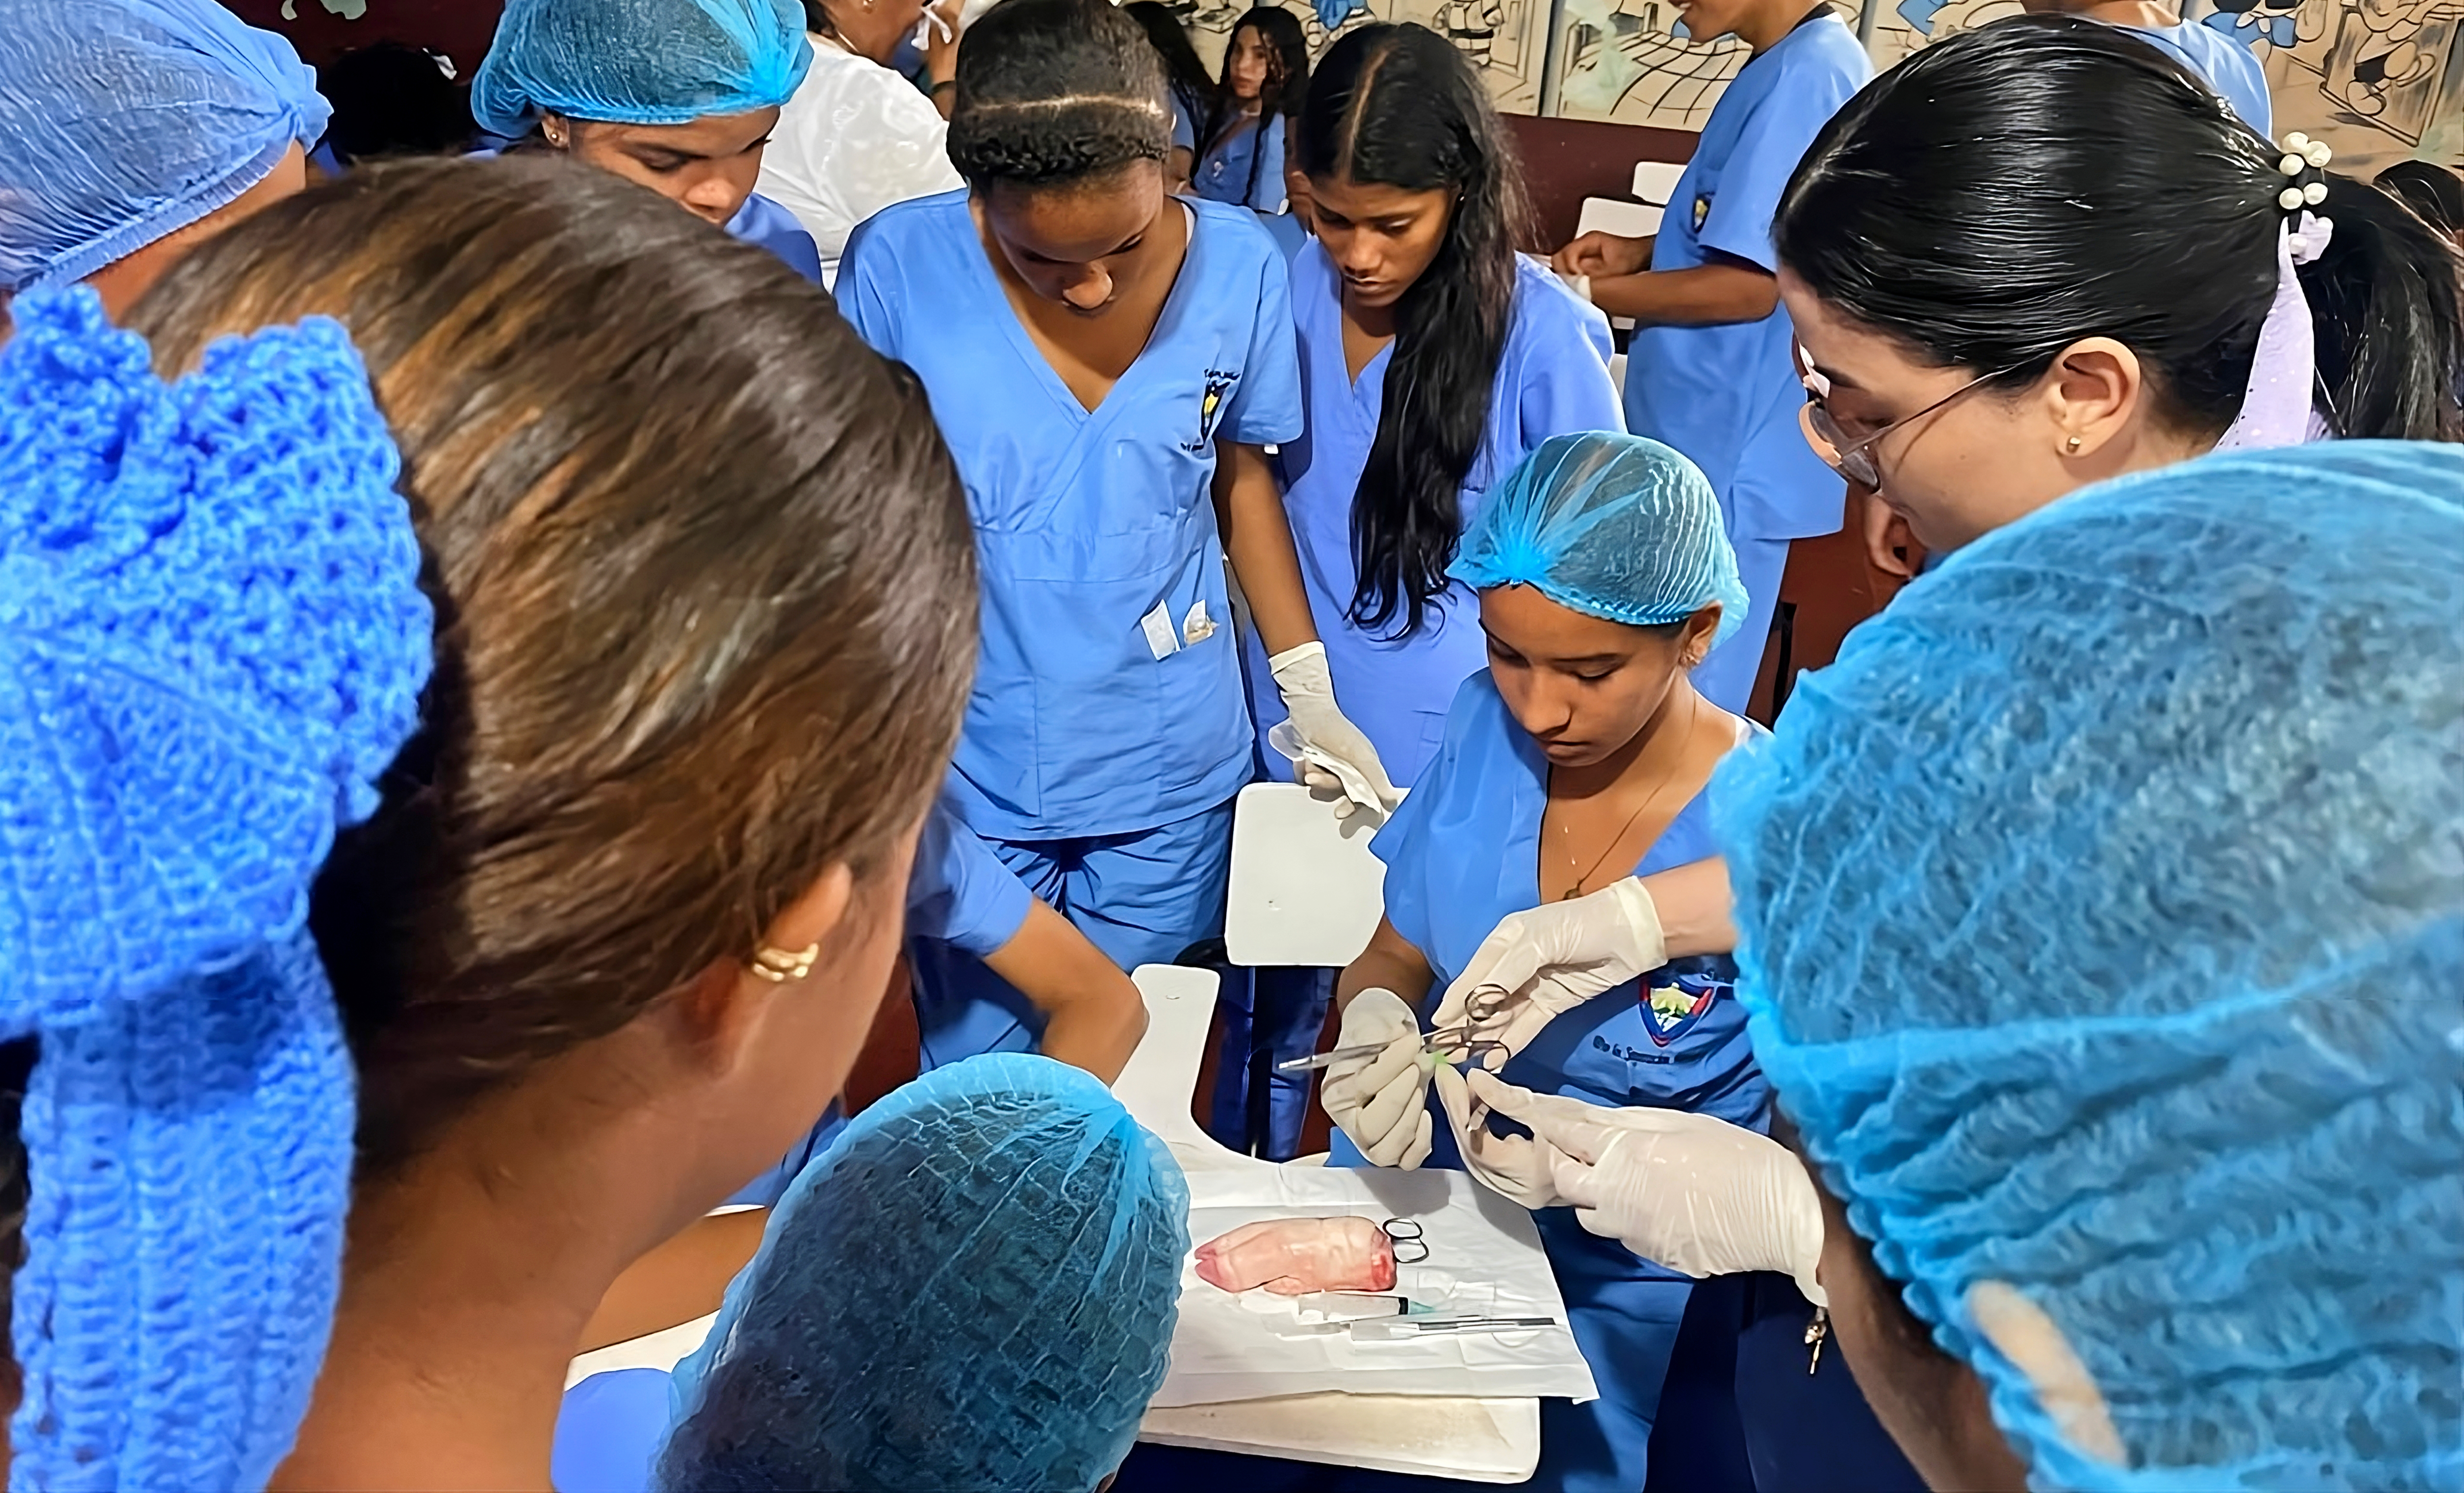 a group of people wearing blue scrubs and gloves